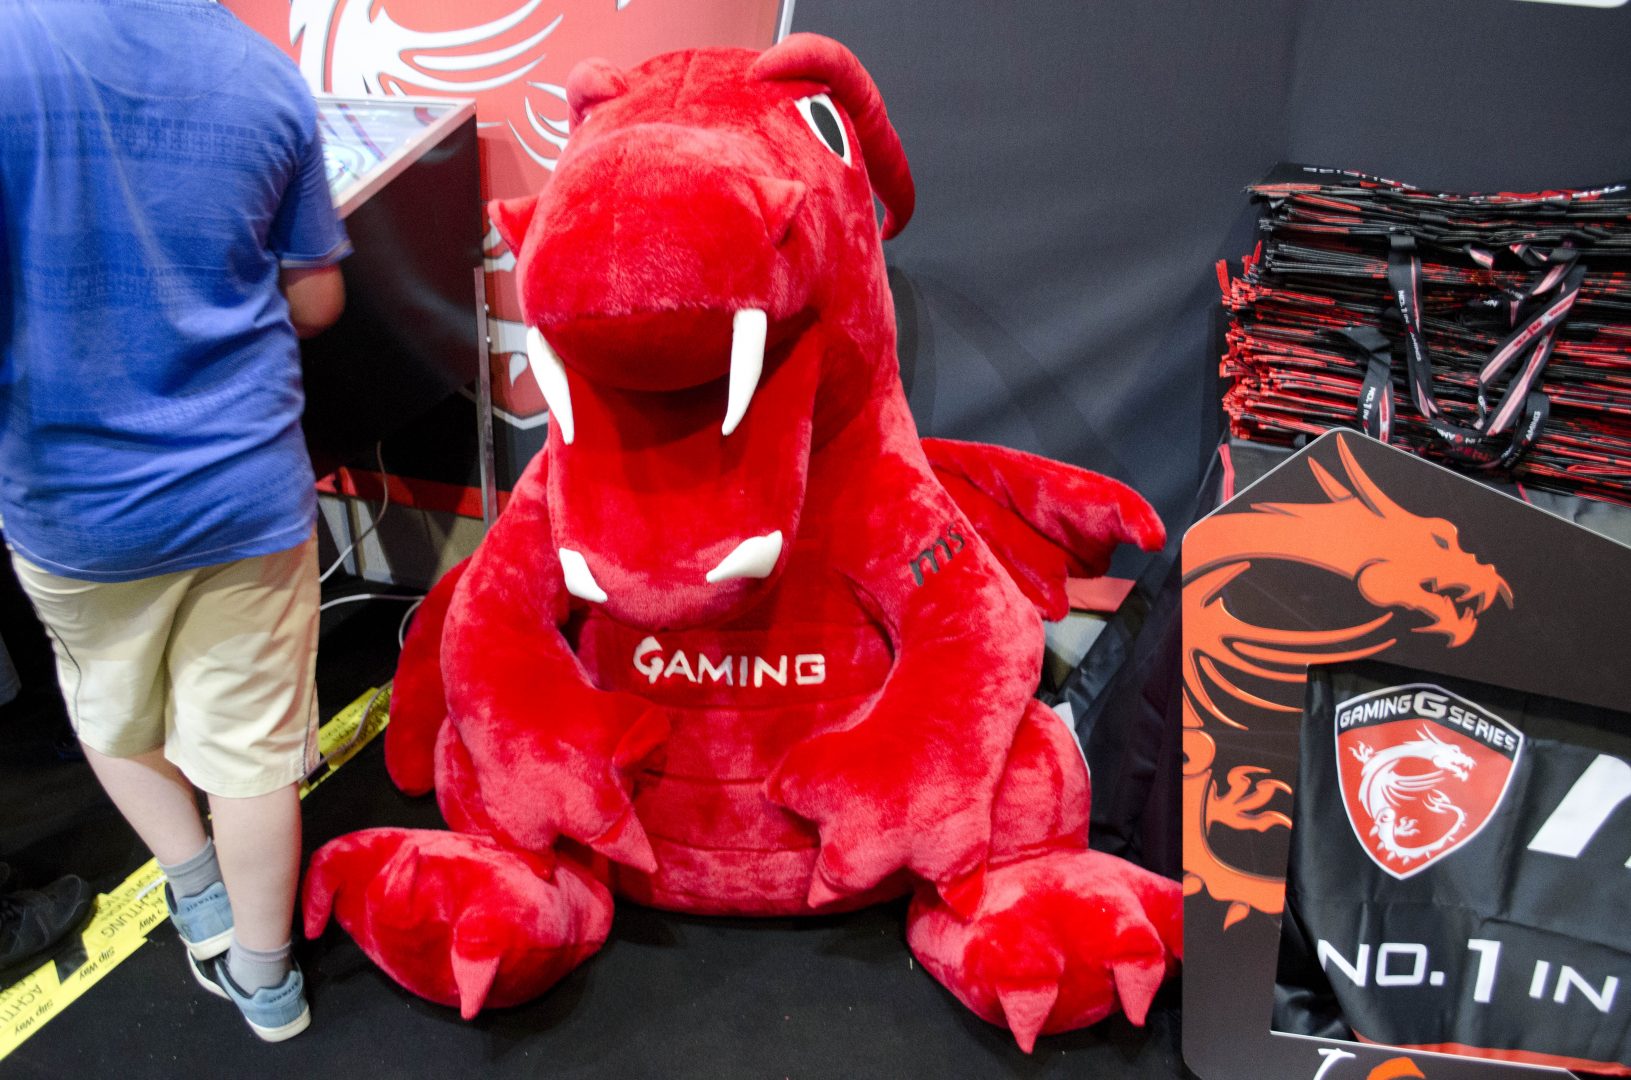 The MSI Booth at Multiplay I55